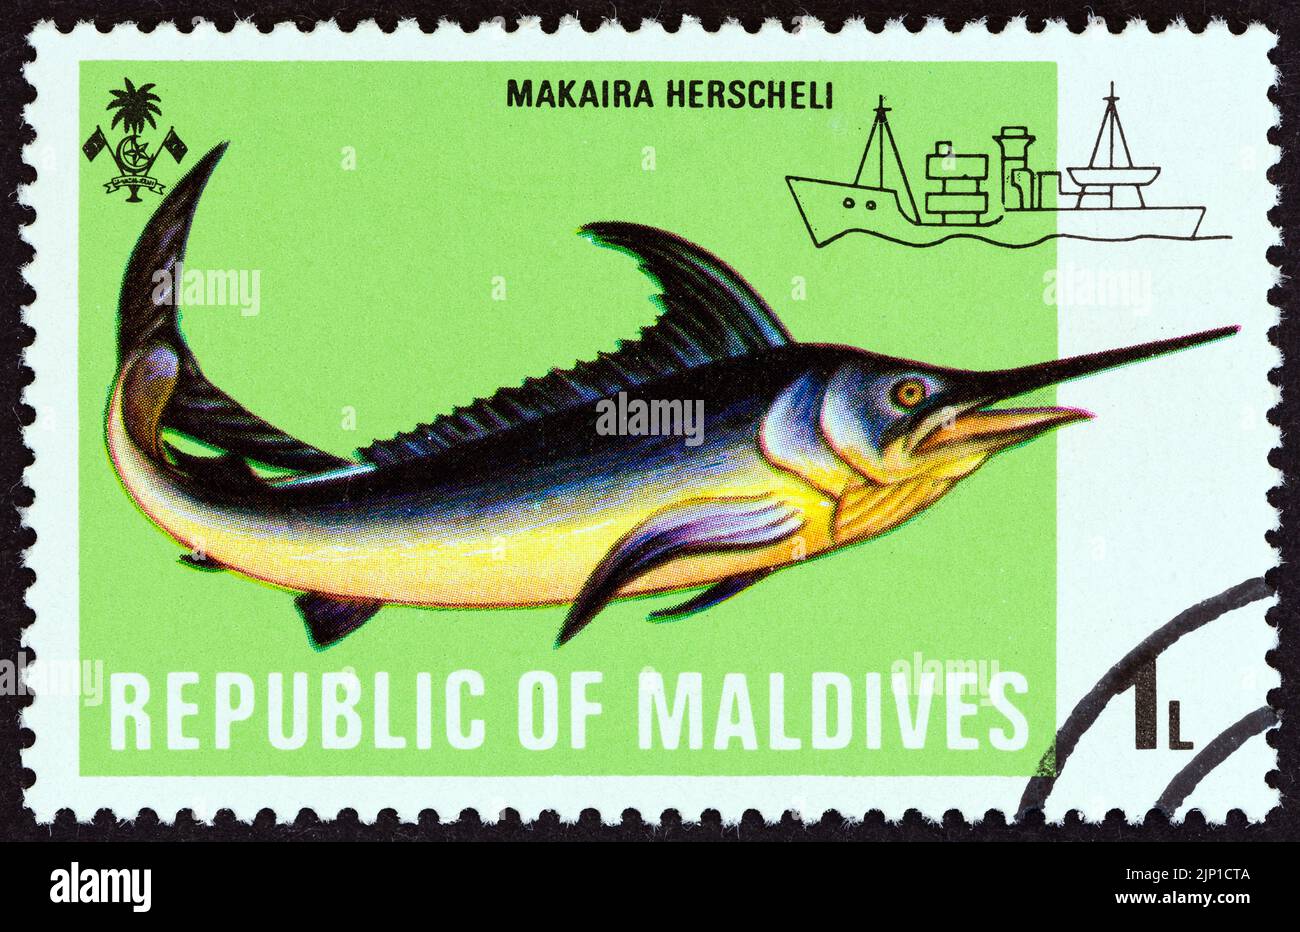 MALDIVES - CIRCA 1973: A stamp printed in Maldives from the 'Fishes' issue shows Marlin (Makaira herscheli), circa 1973. Stock Photo